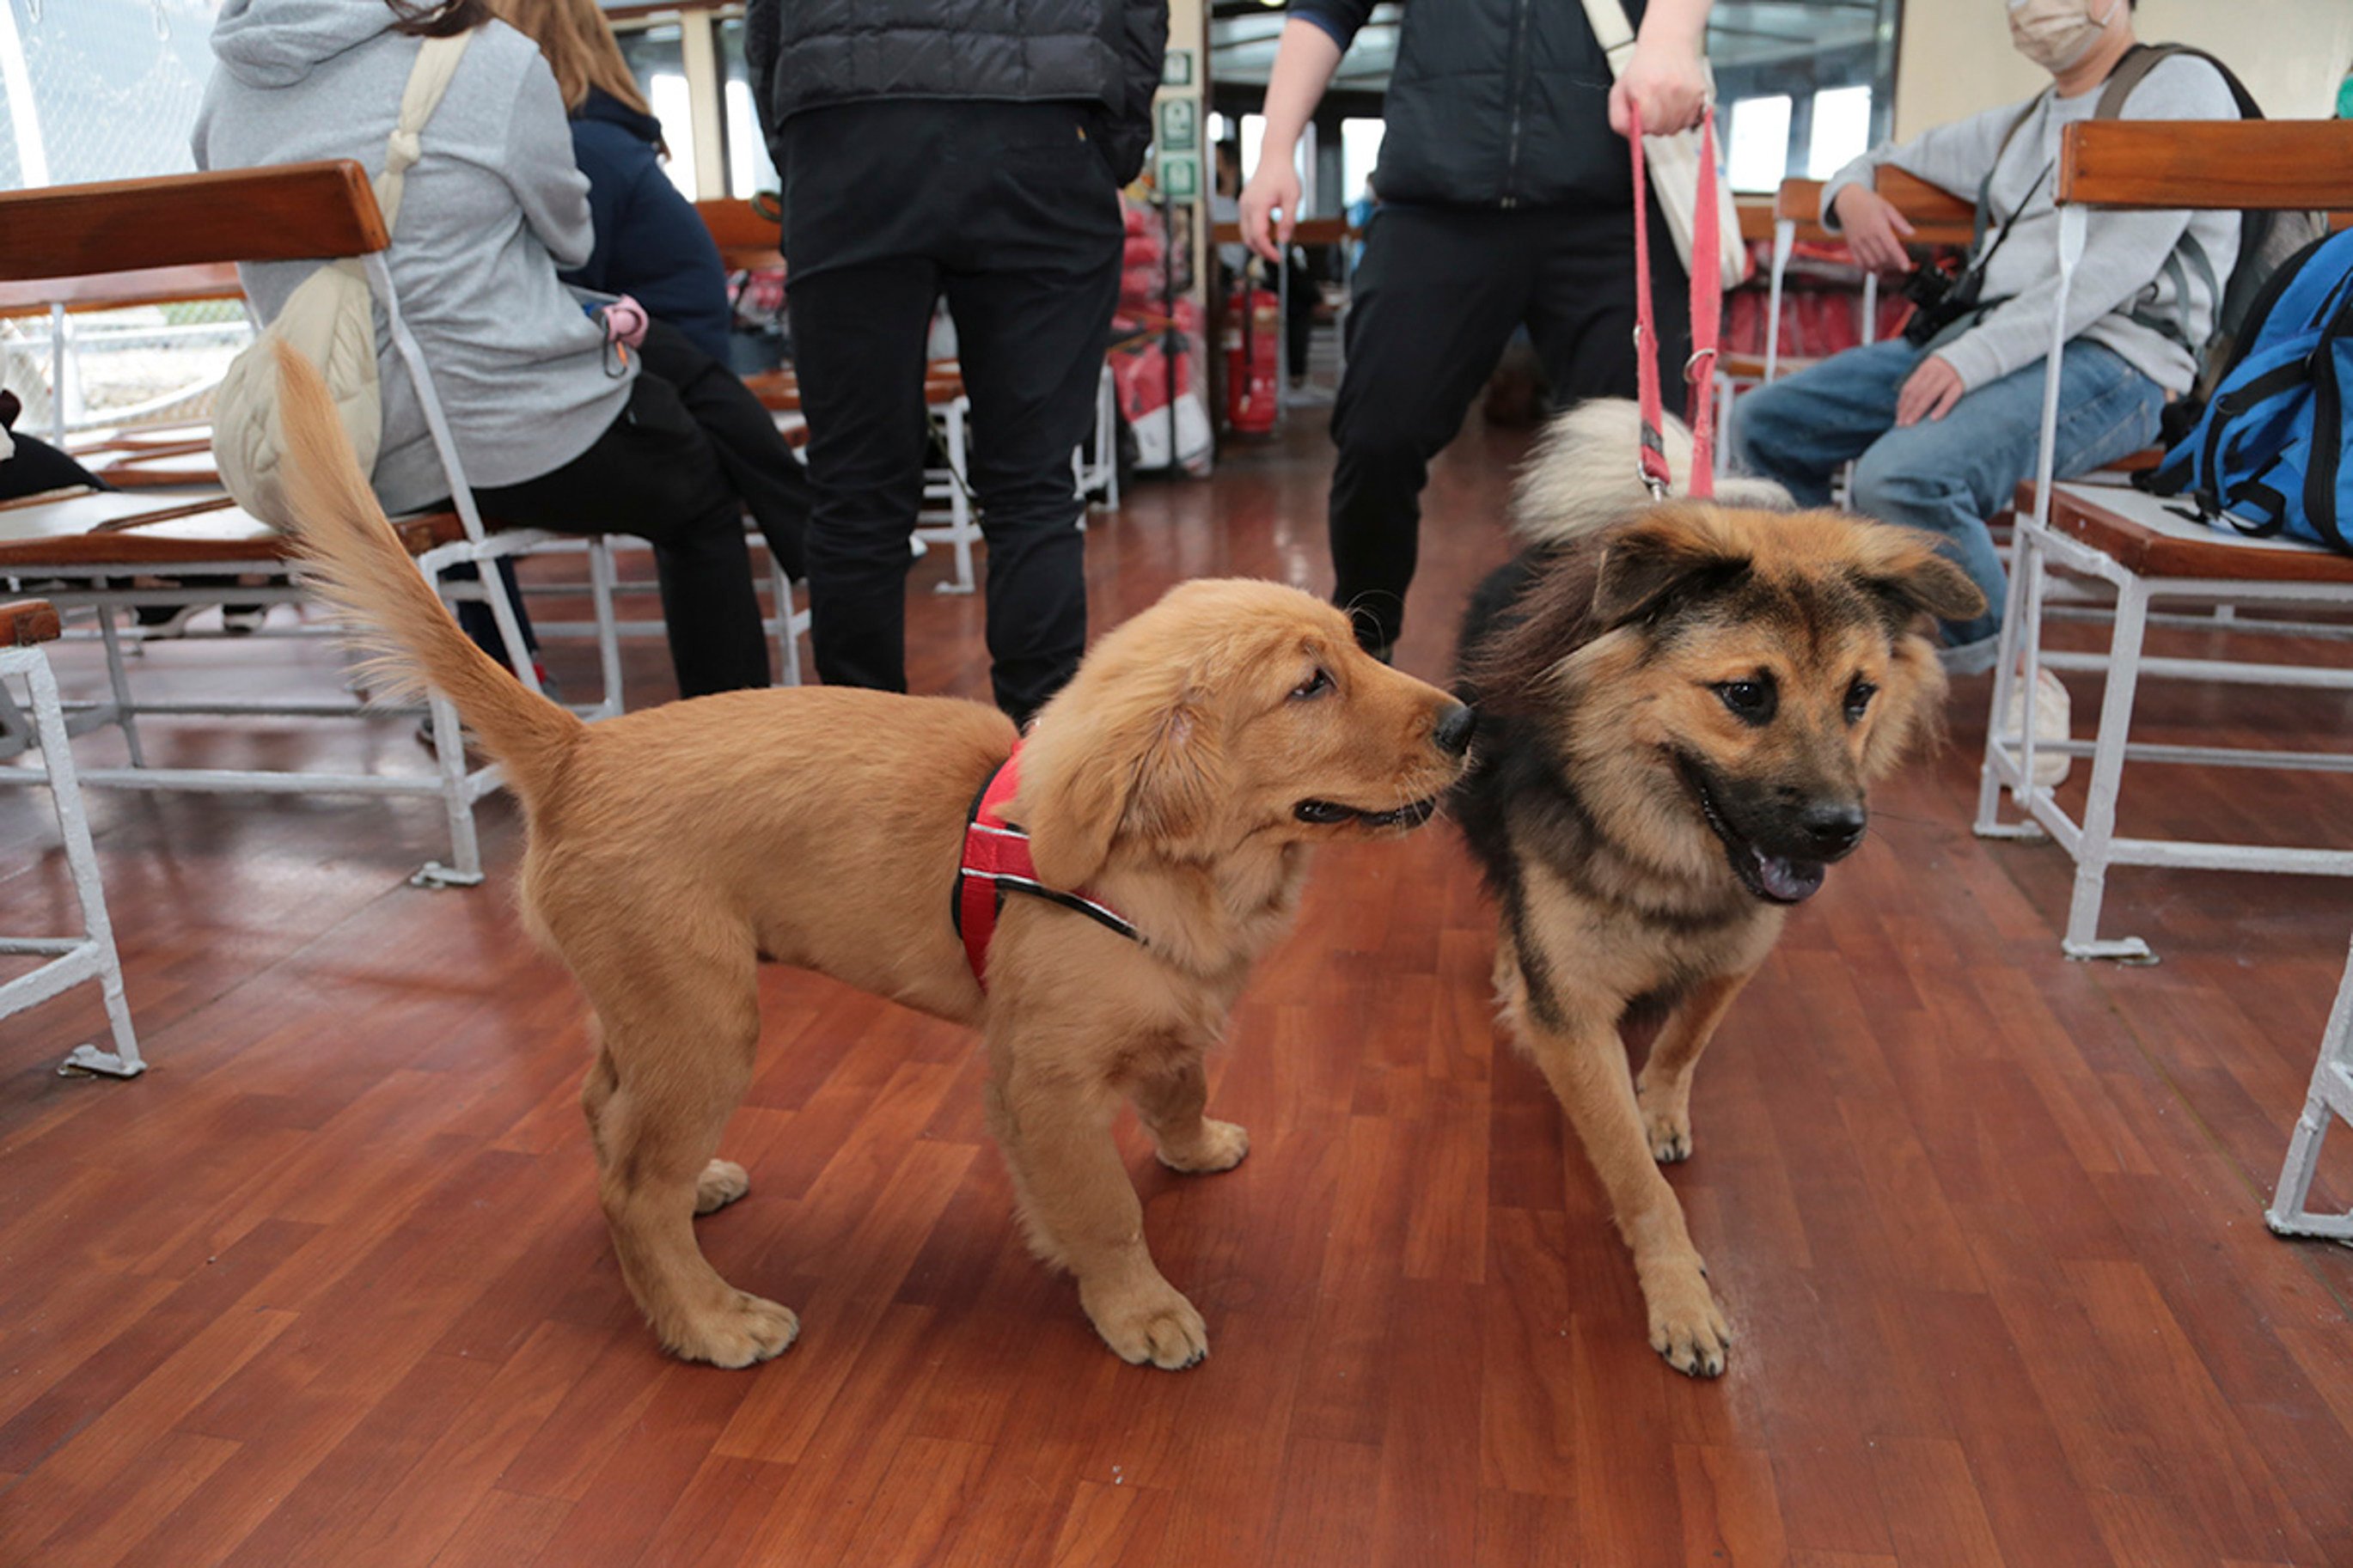 “DOG DOG Shipcation”, which will see a two-day lifting of the Star Ferry’s ban on pet dogs, allowing them on special cruises, aims to open up conversations about the need for more pet-friendly transport in Hong Kong. Photo: SPCA